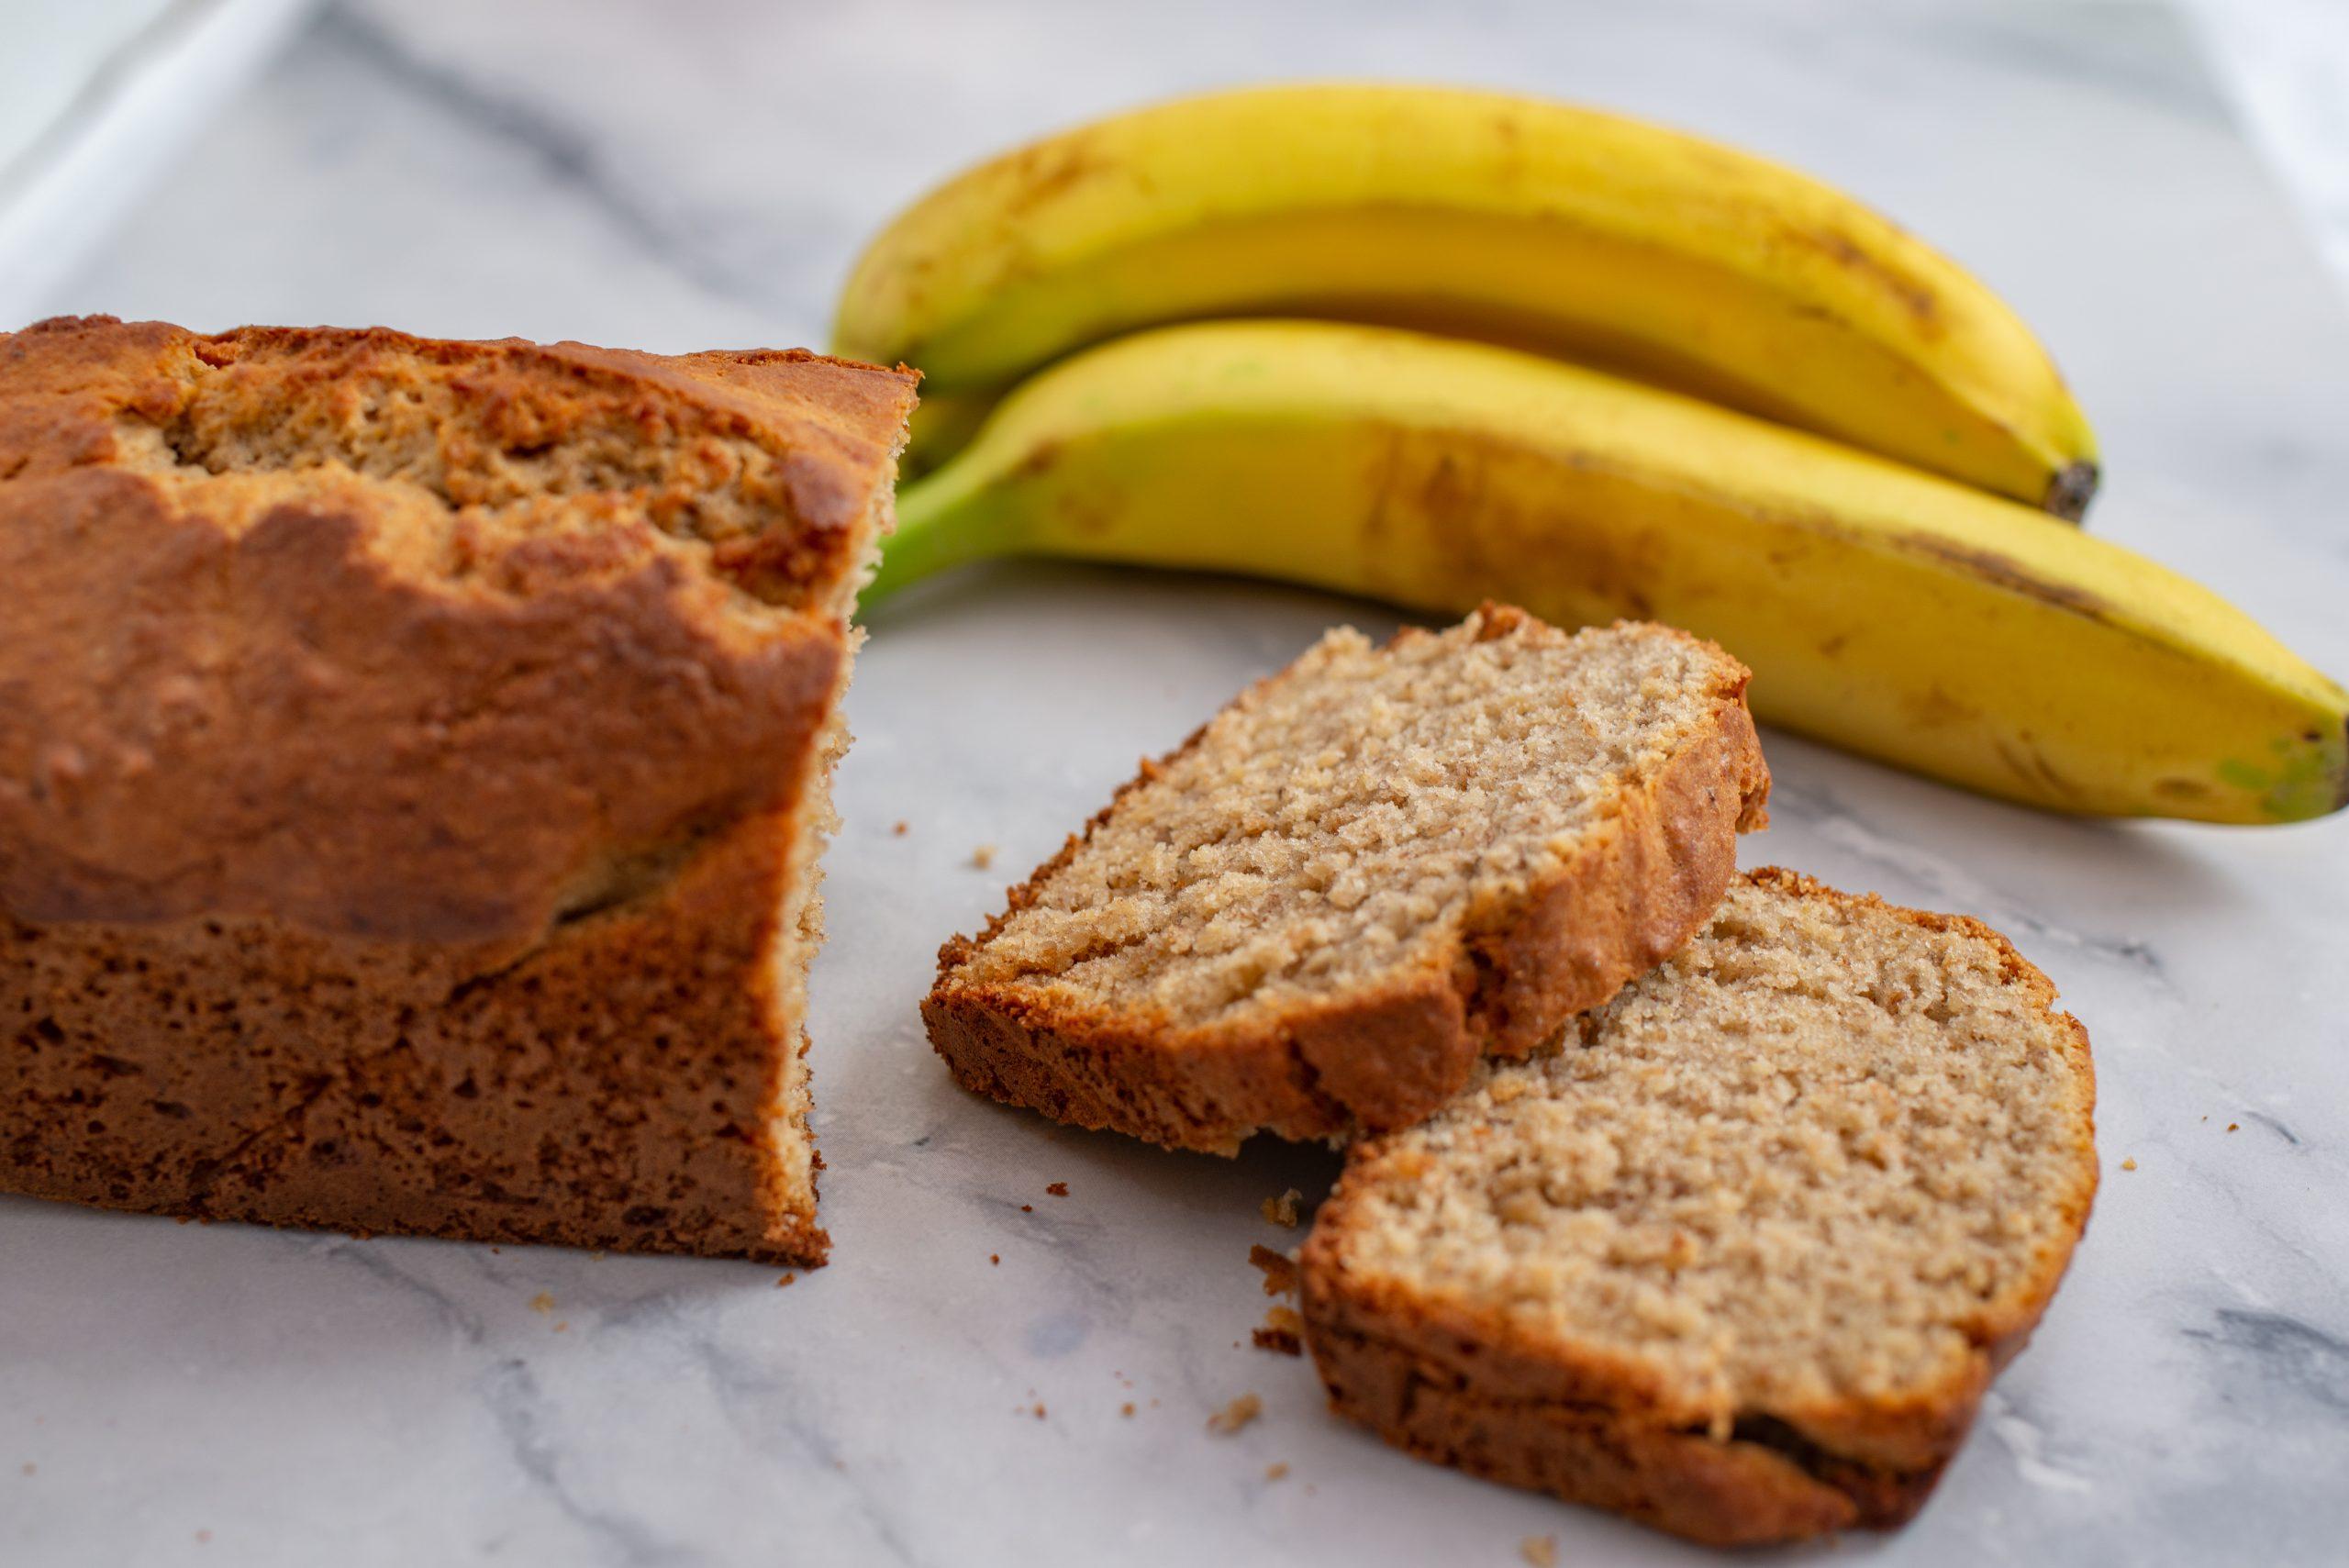 Woolworths launches Banana Bread for good - Retail World Magazine